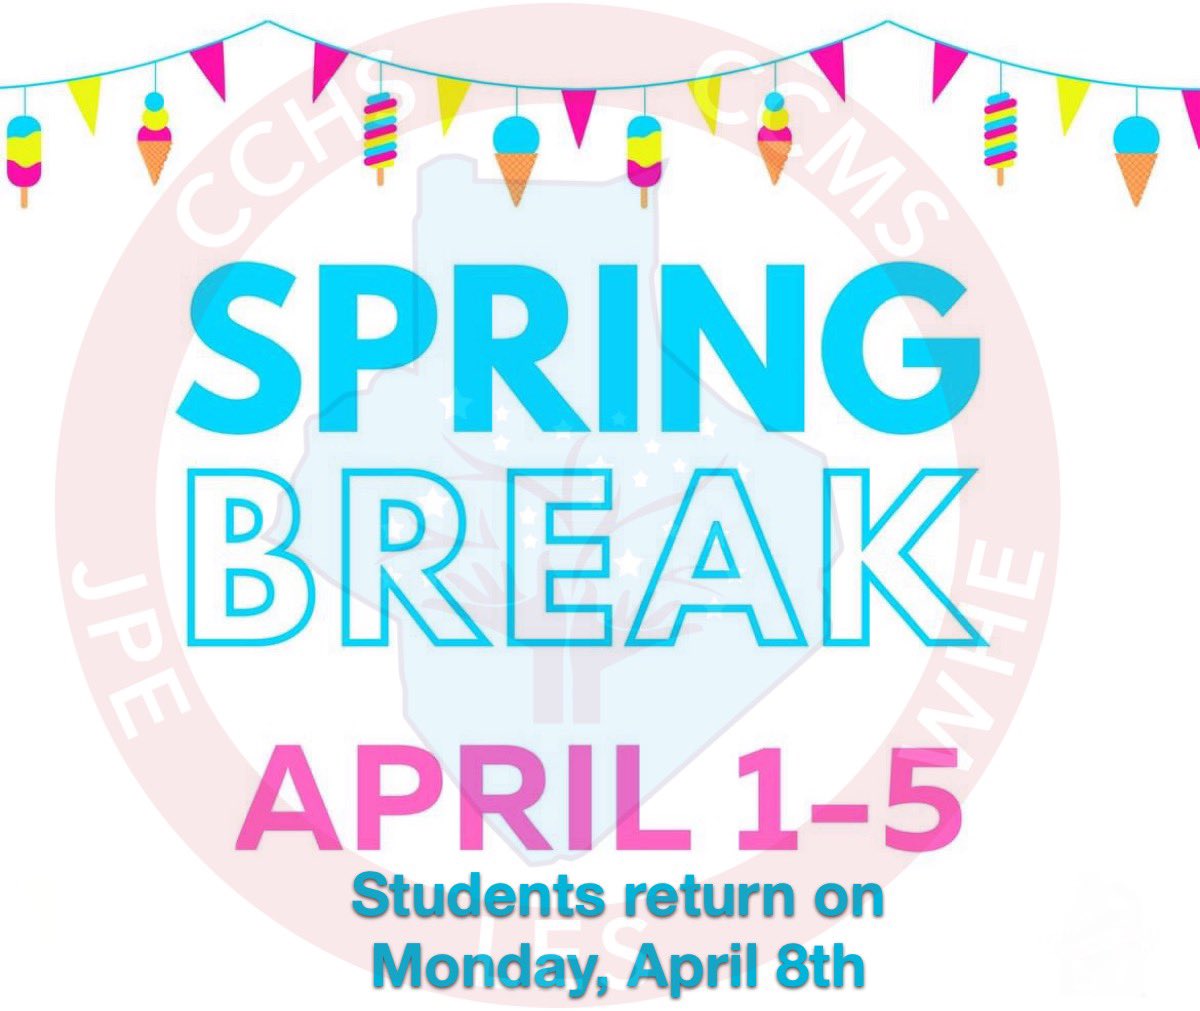 SPRING BREAK REMINDER: A friendly reminder to our families. NO SCHOOL NEXT WEEK. Spring Break is scheduled April 1st - April 5th for @CaseyCoSchools. Classes will resume on Monday, April 8th. Enjoy this well-deserved break!